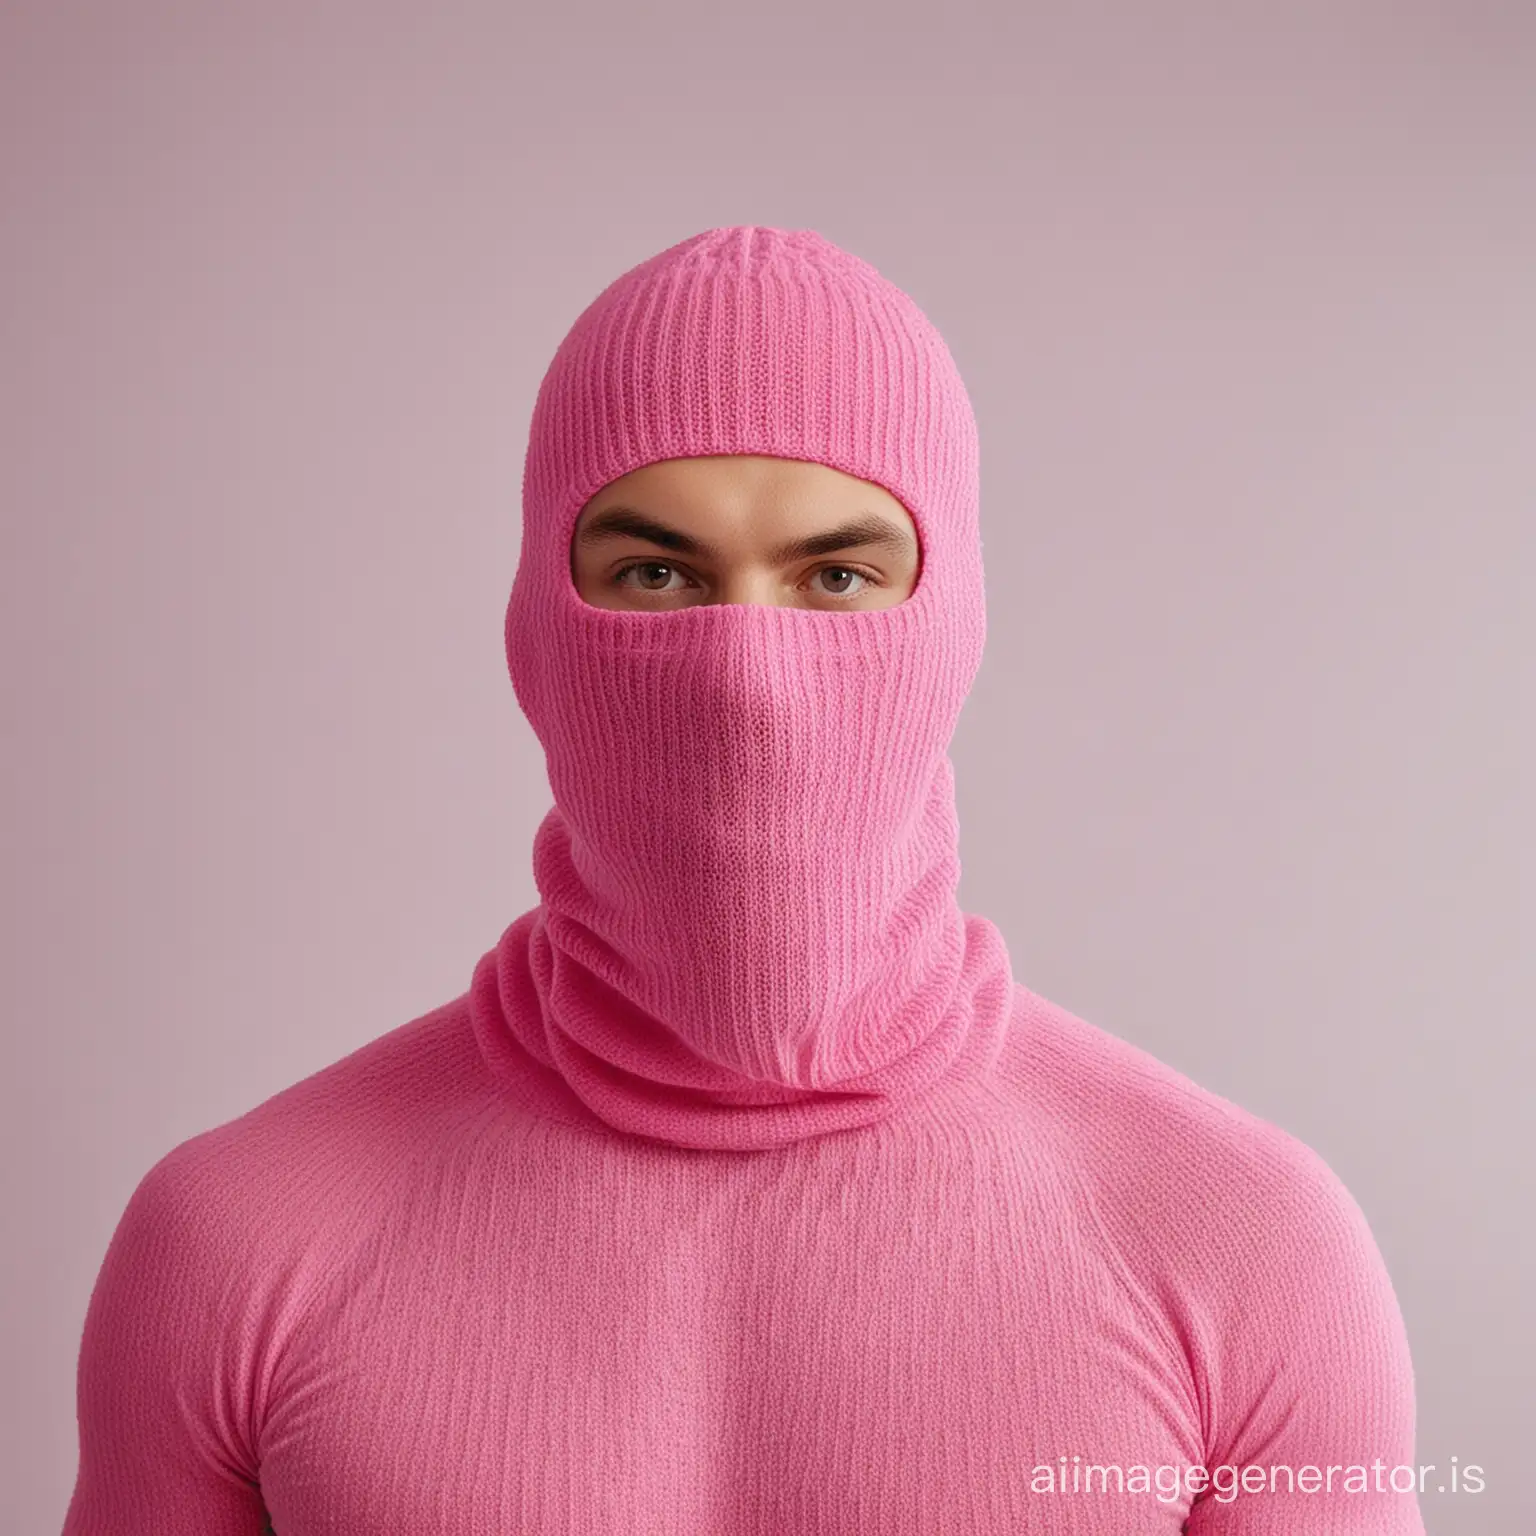 Sperm-Cell-Embraces-Athletic-Man-in-Pink-Balaclava